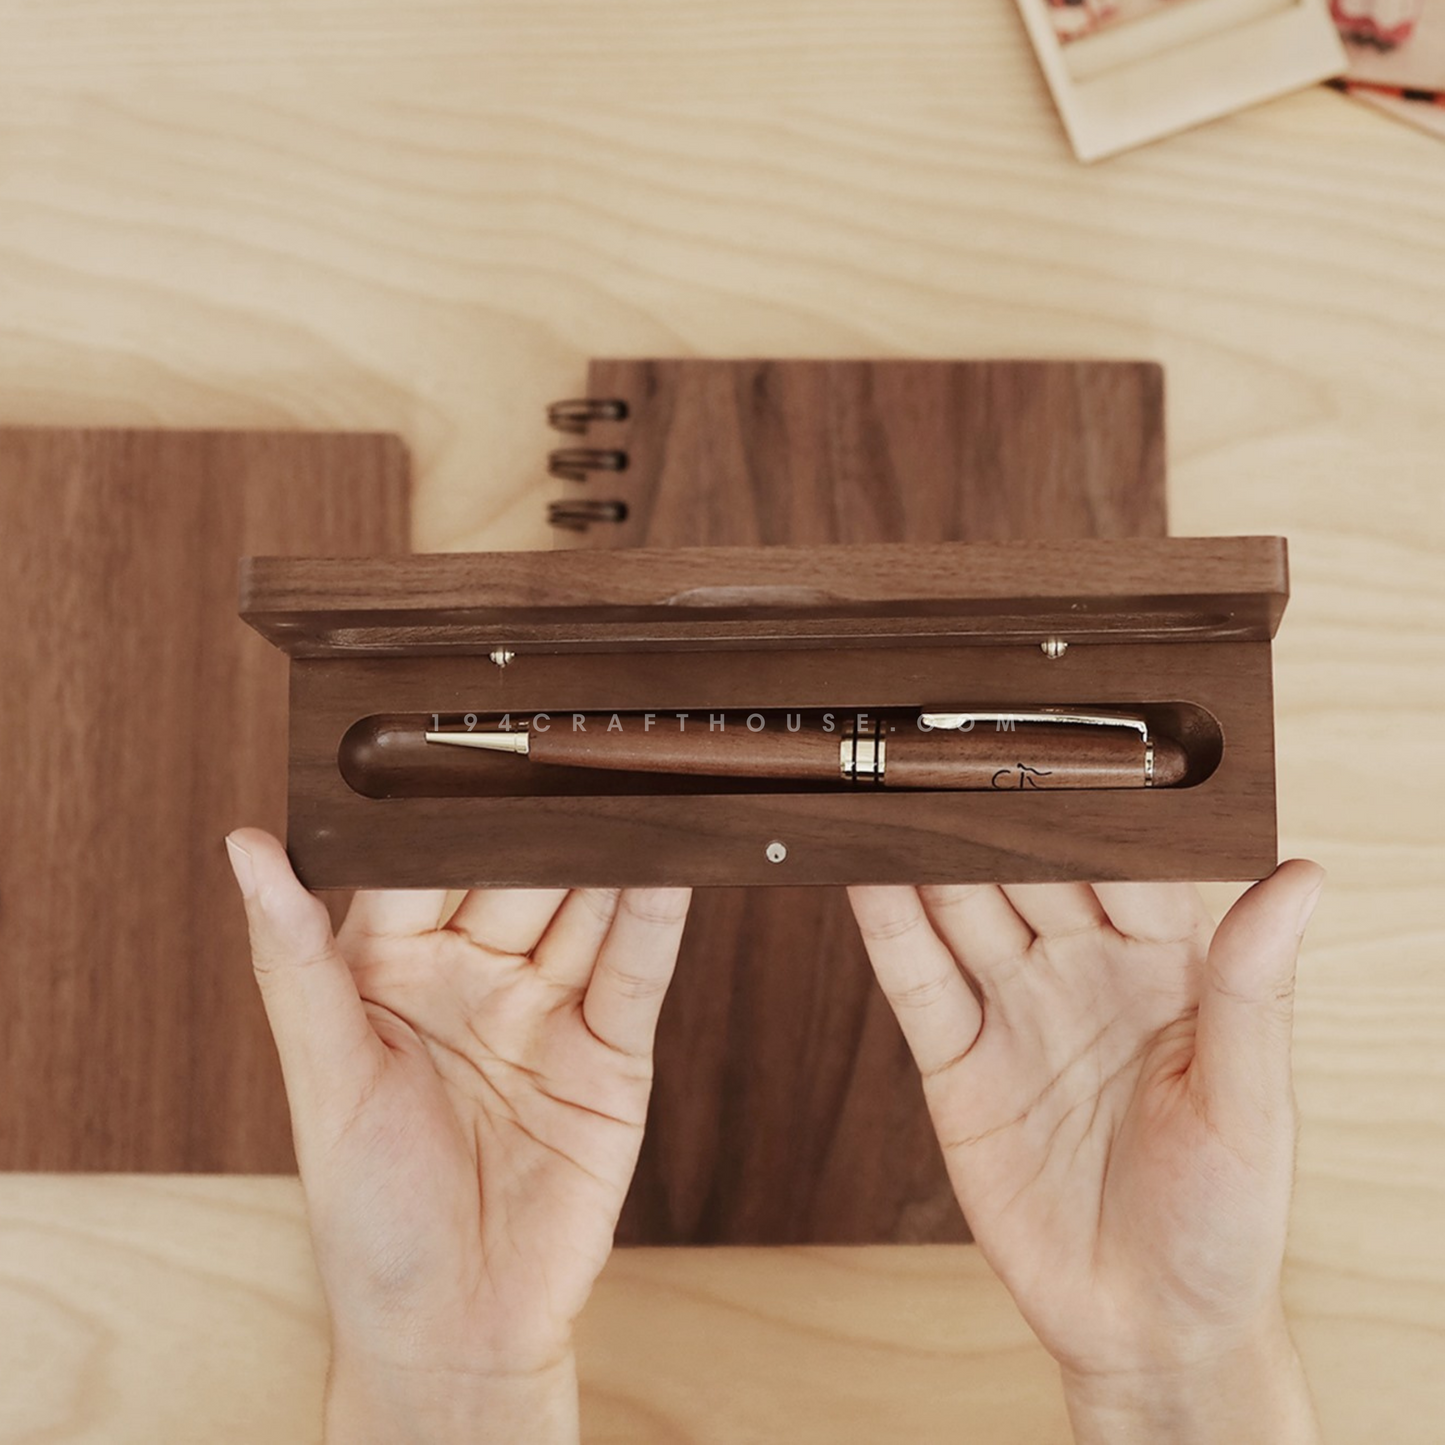 Engraved Walnut Wooden Pen And Box Personalized Pen Set Gift